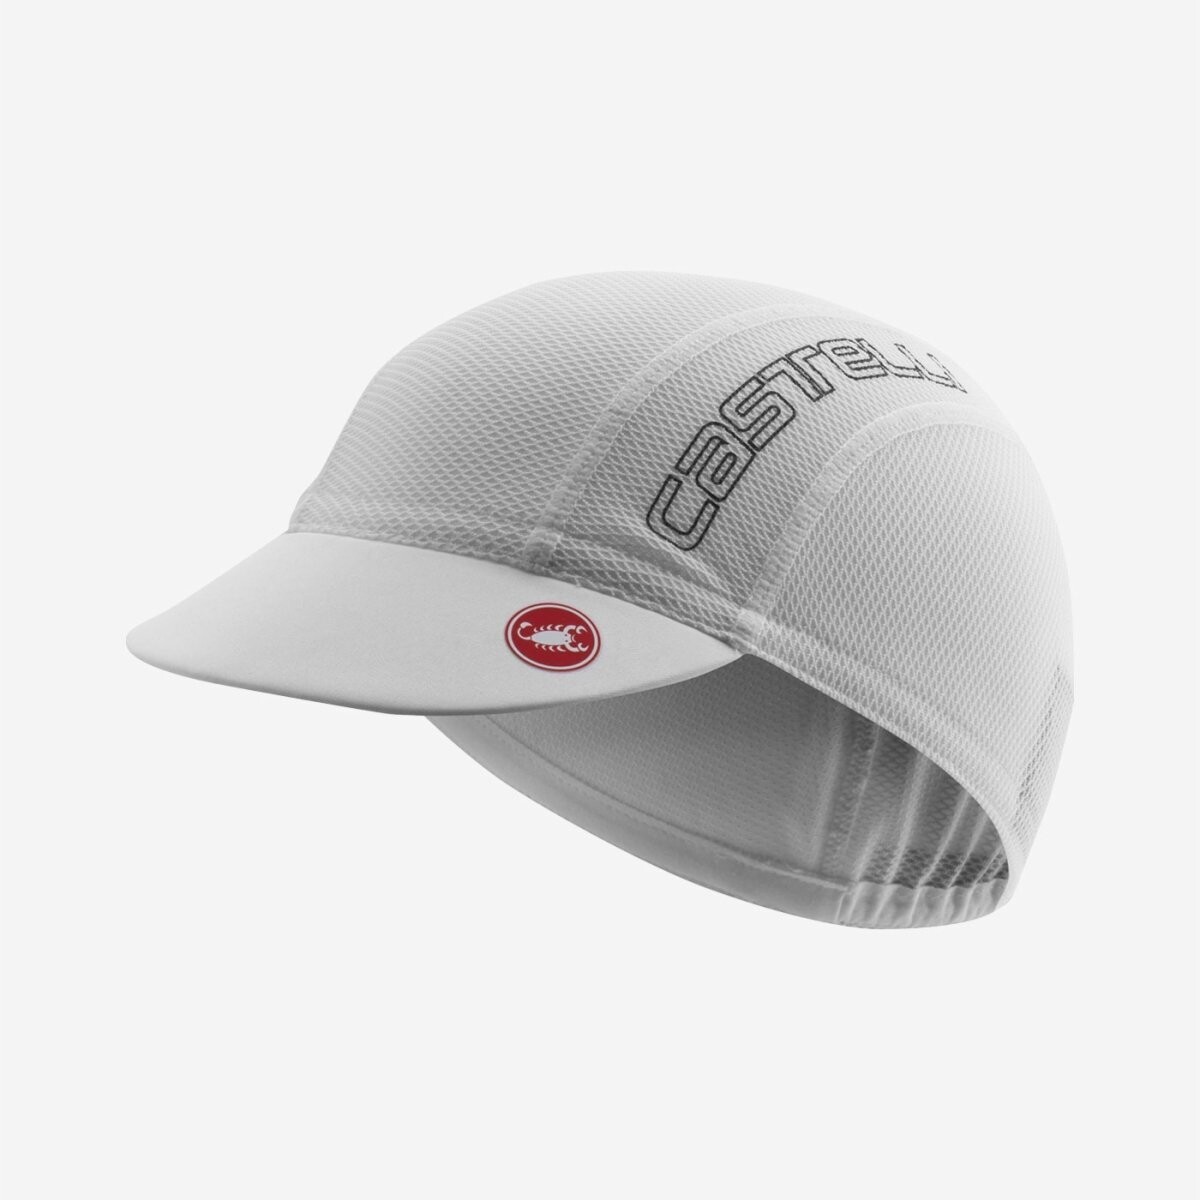 Castelli A/C 2 Cycling Cap - White and Cool Grey